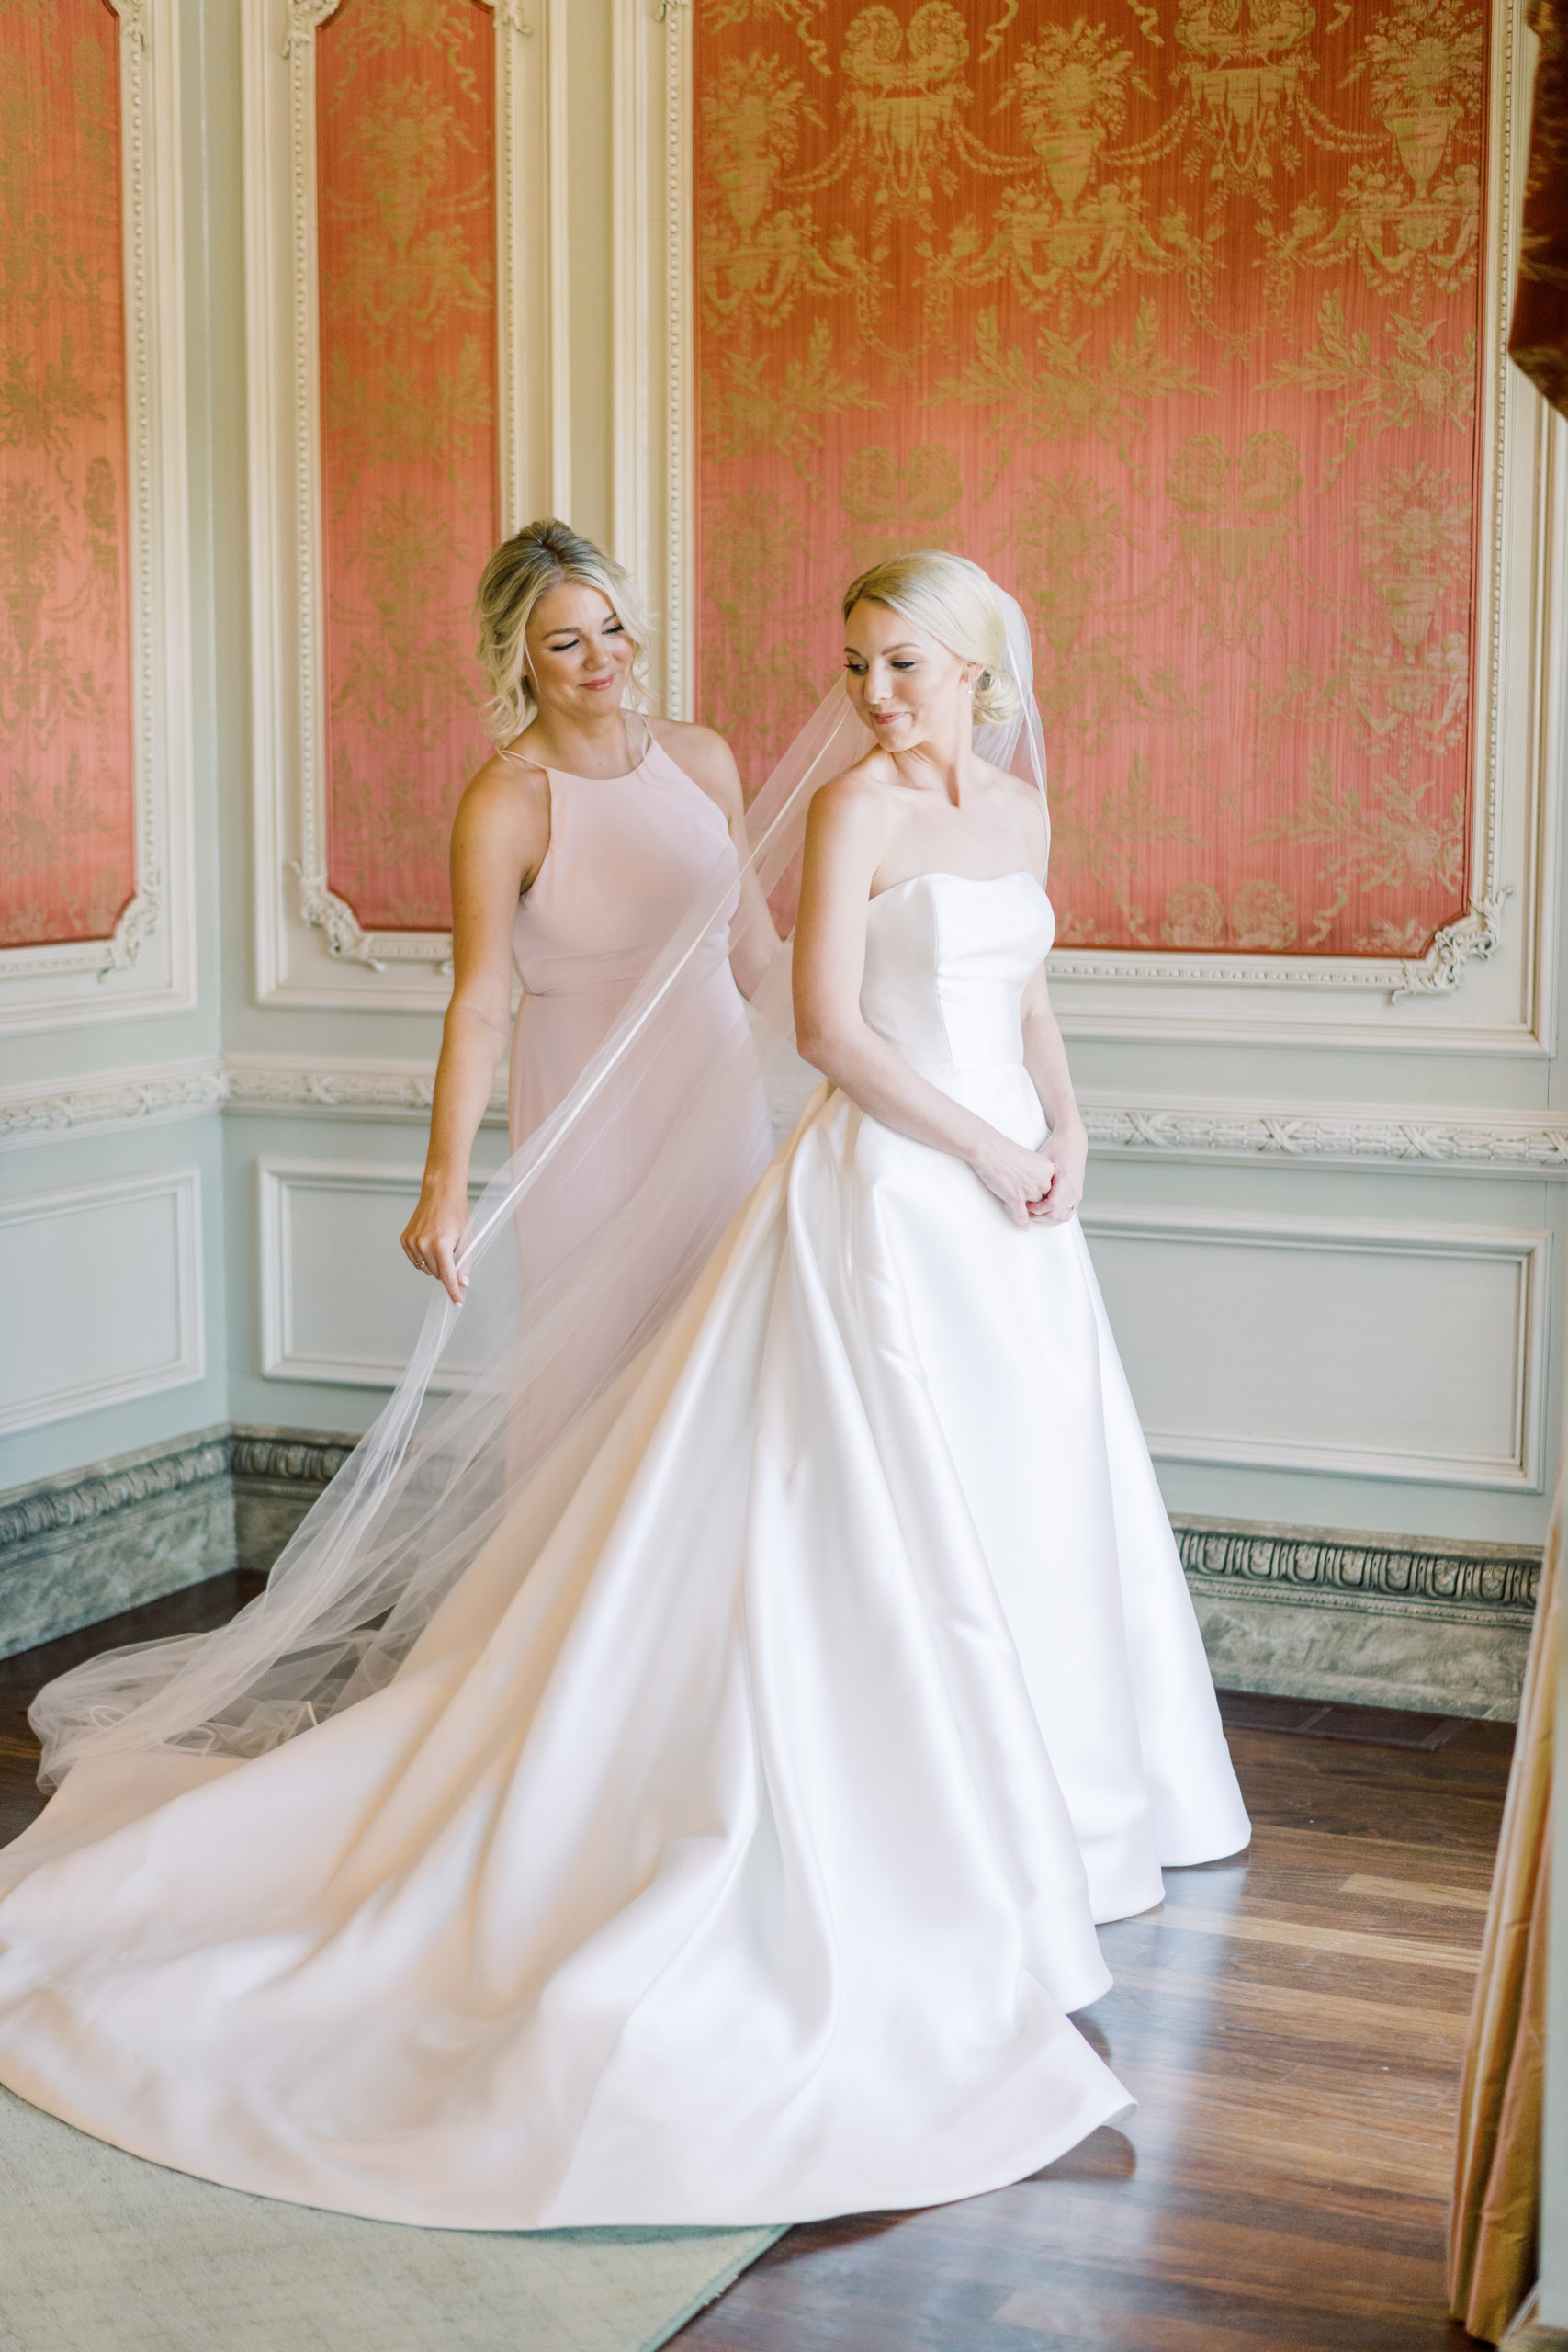 Bride poses with her maid of honor in one of the suites at The Olana